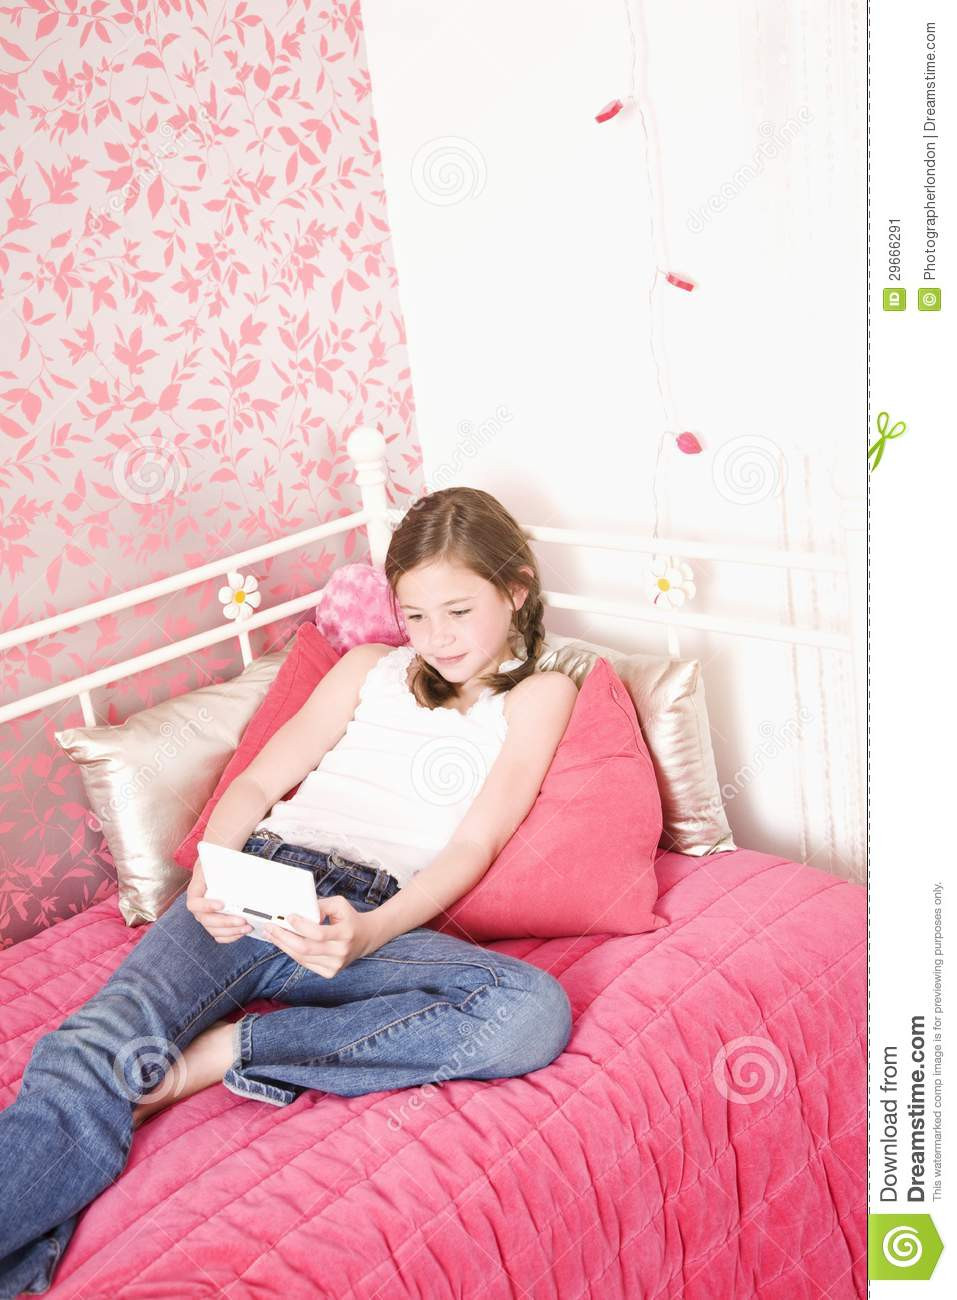 Girl In The Bedroom
 Young Girl In Bedroom Playing Handheld Game Stock Image